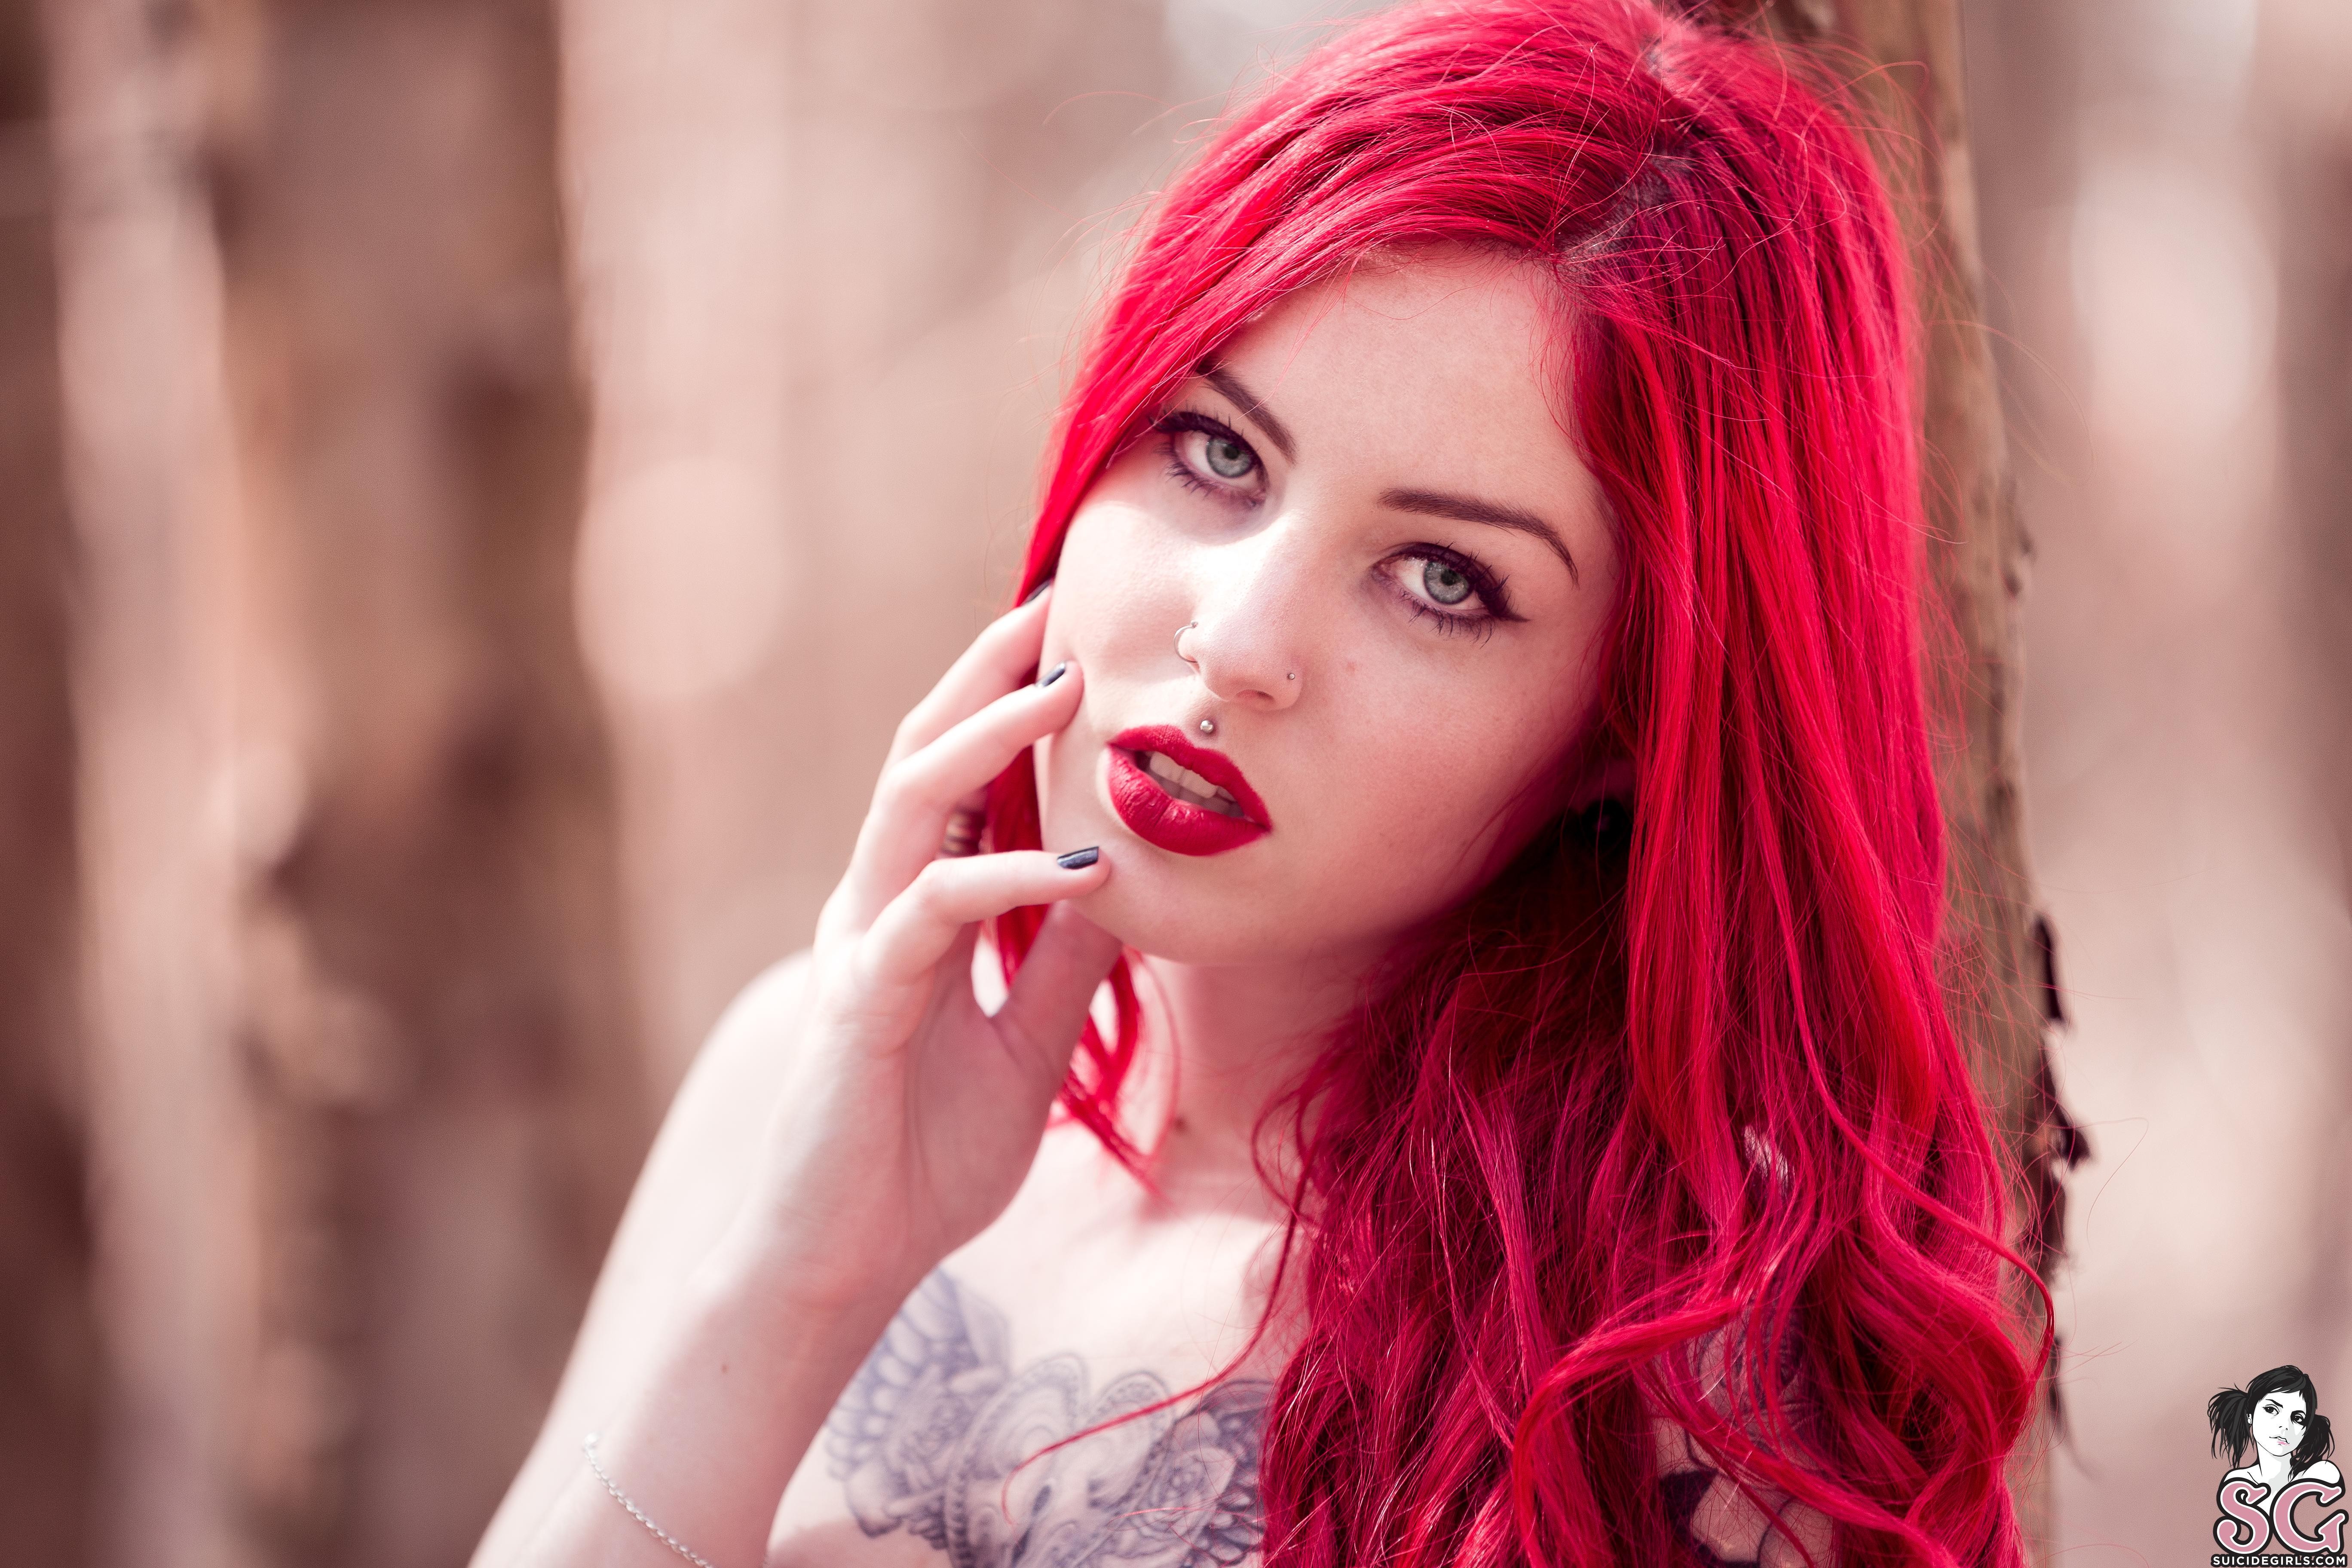 People 5472x3648 Brunabruce Suicide Suicide Girls redhead tattoo Latinas Brazilian Brazilian women pornstar piercing black nails painted nails dyed hair long hair looking at viewer women closeup watermarked